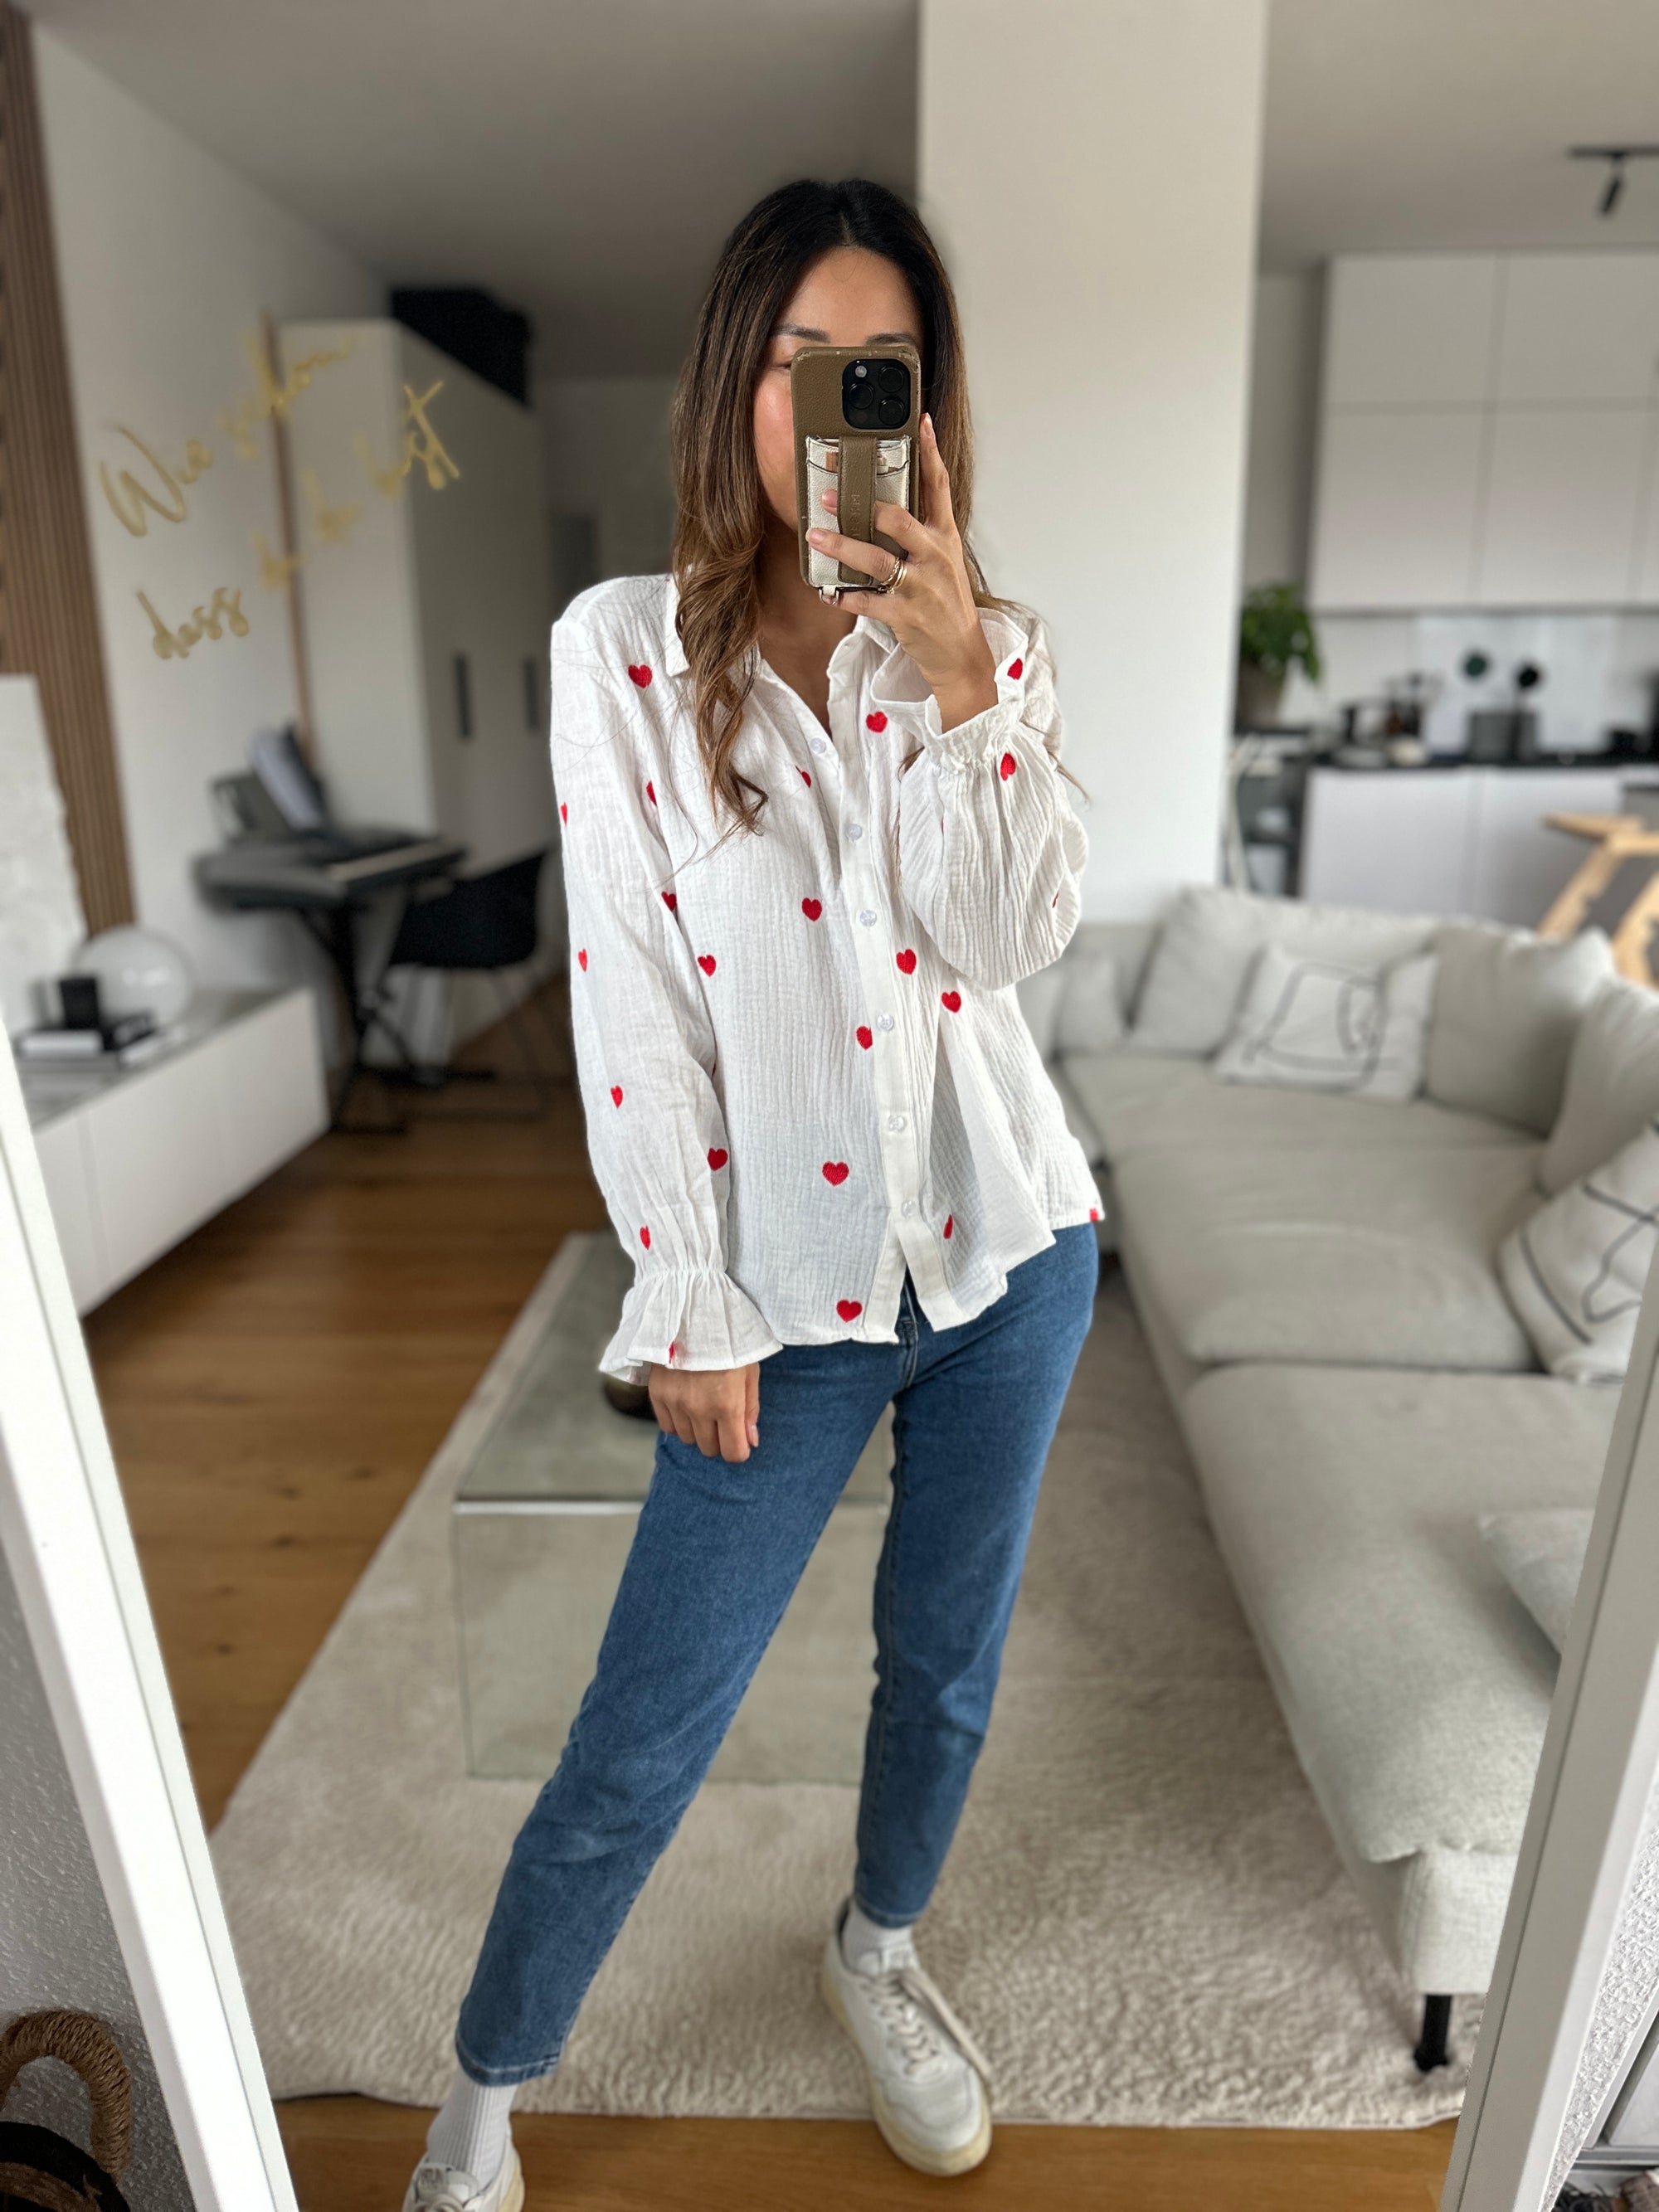 Musselinbluse Herz rot